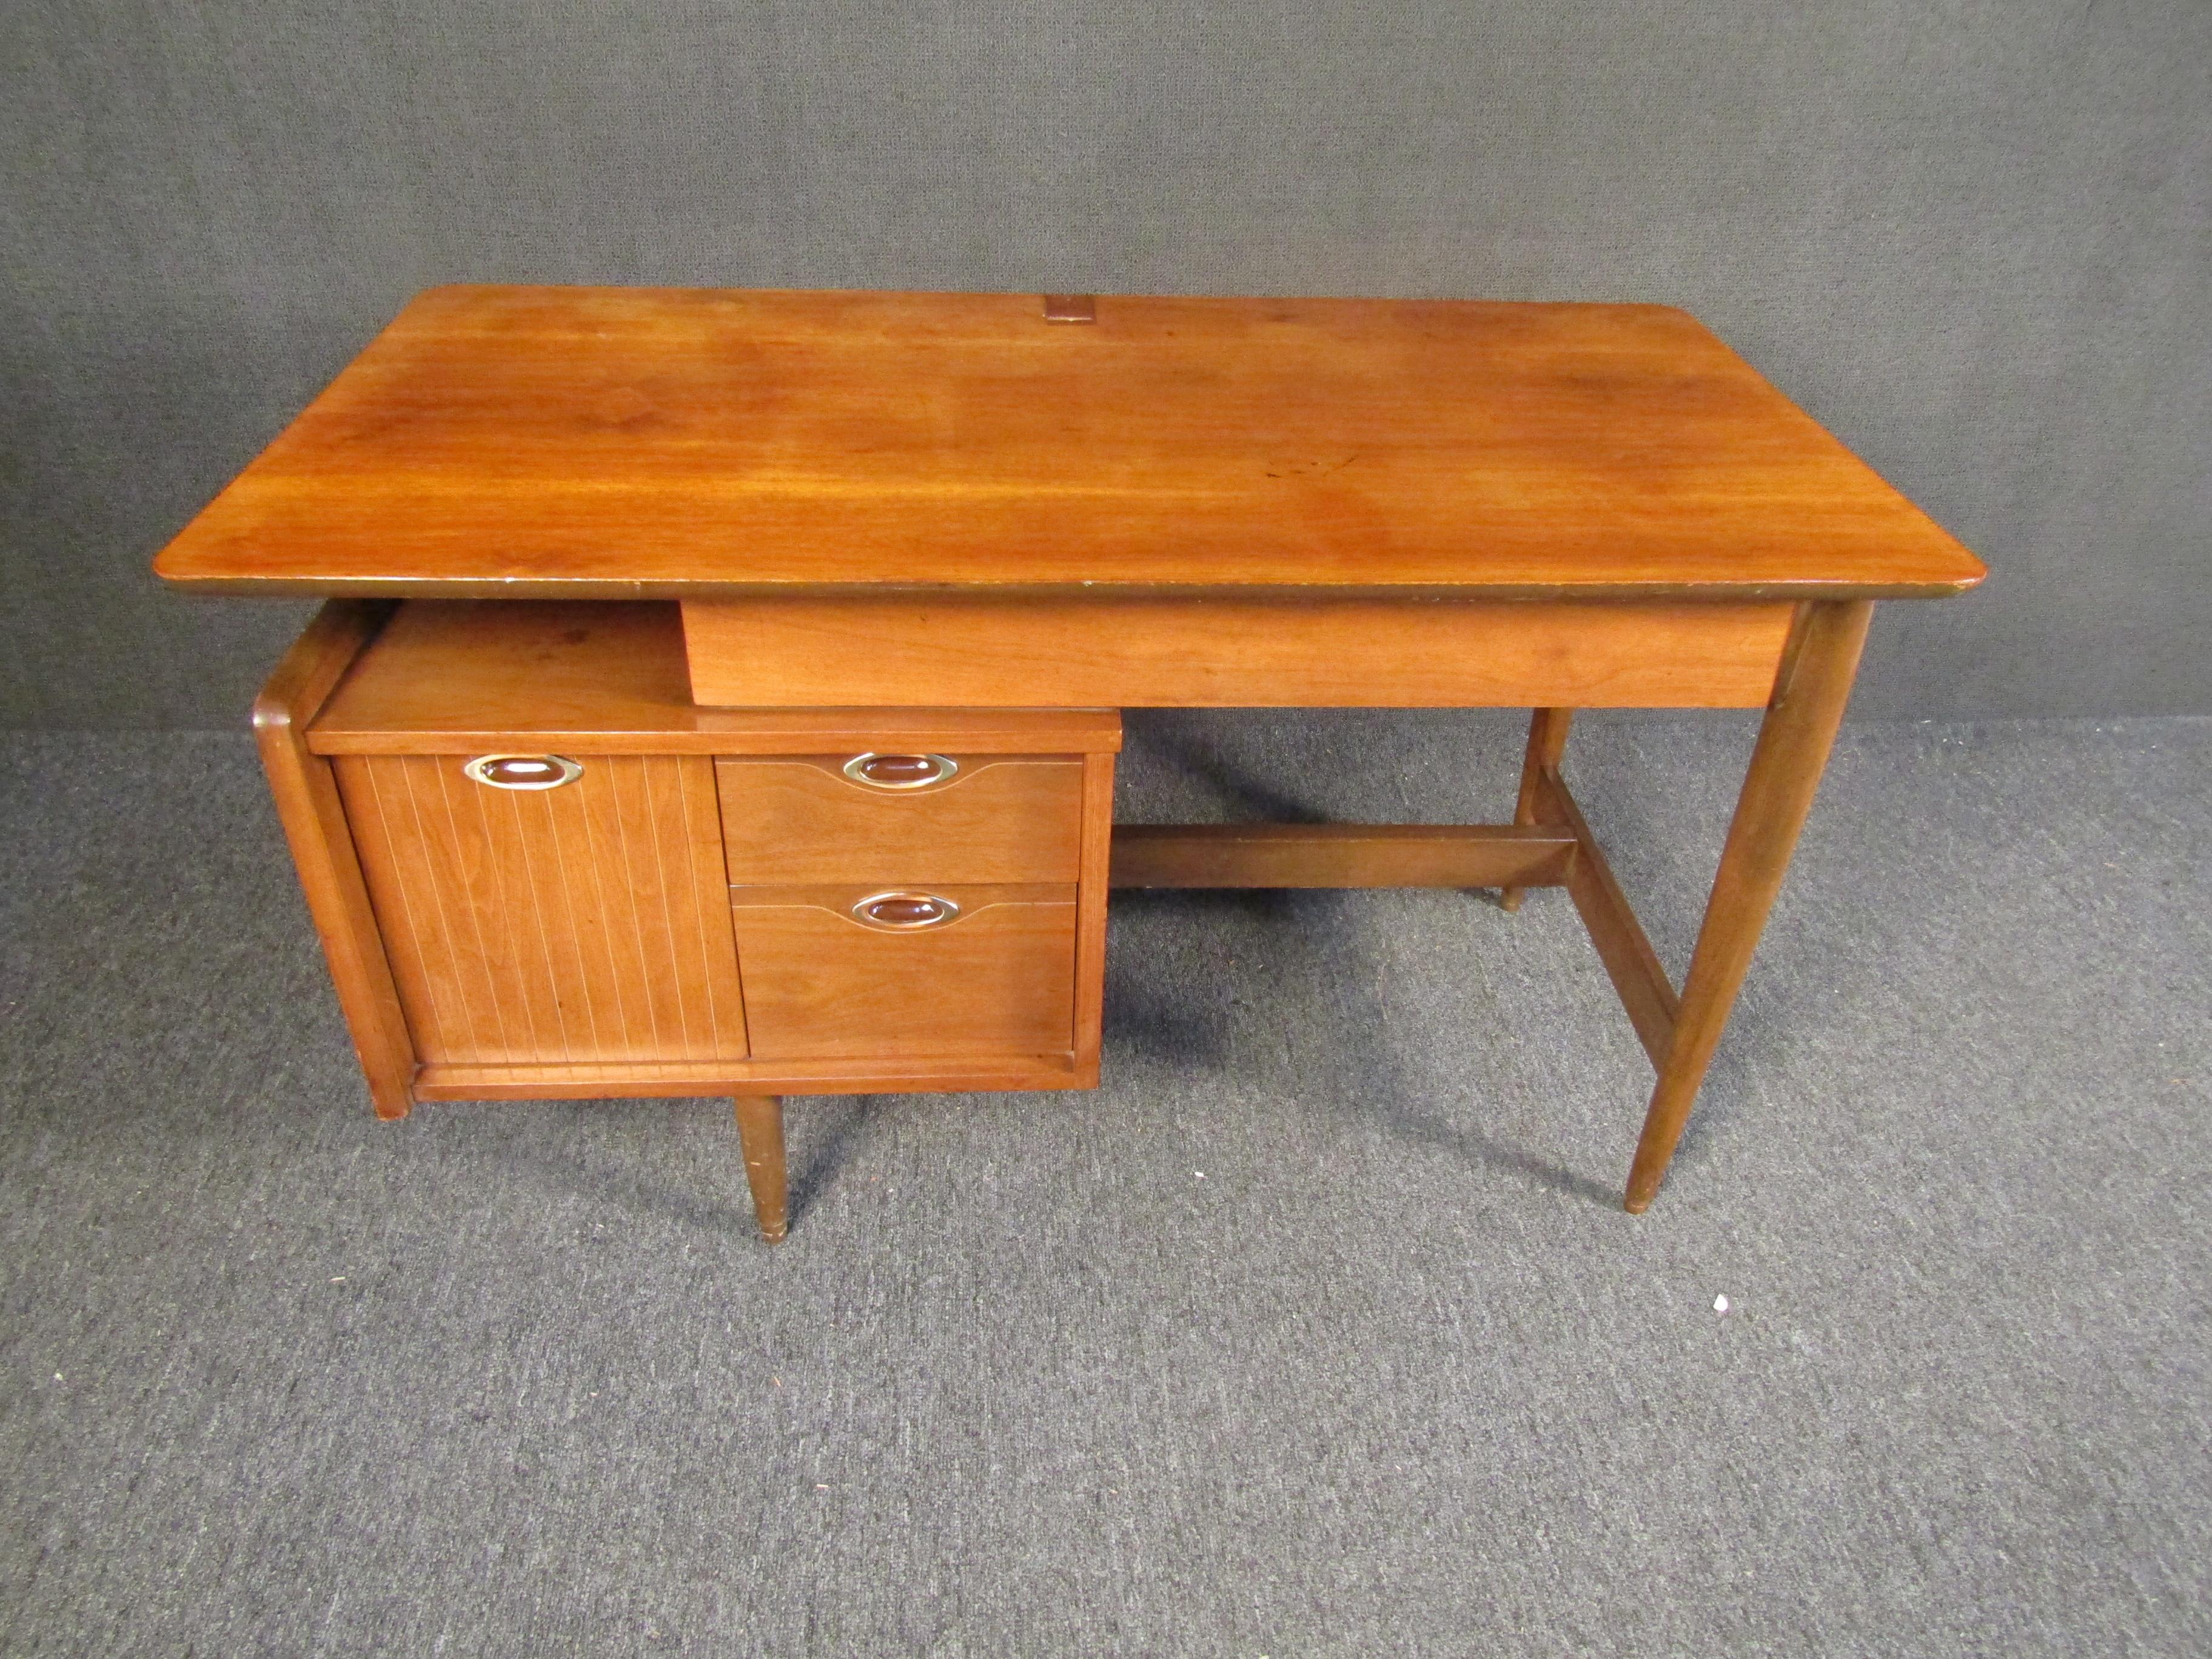 Elegant, functional, and full of mid-century quality, this vintage writing desk by Mainline stands out with its rich walnut woodgrain and stylish design. Spacious compartments allow for easy filing and storage, while a large writing surface makes